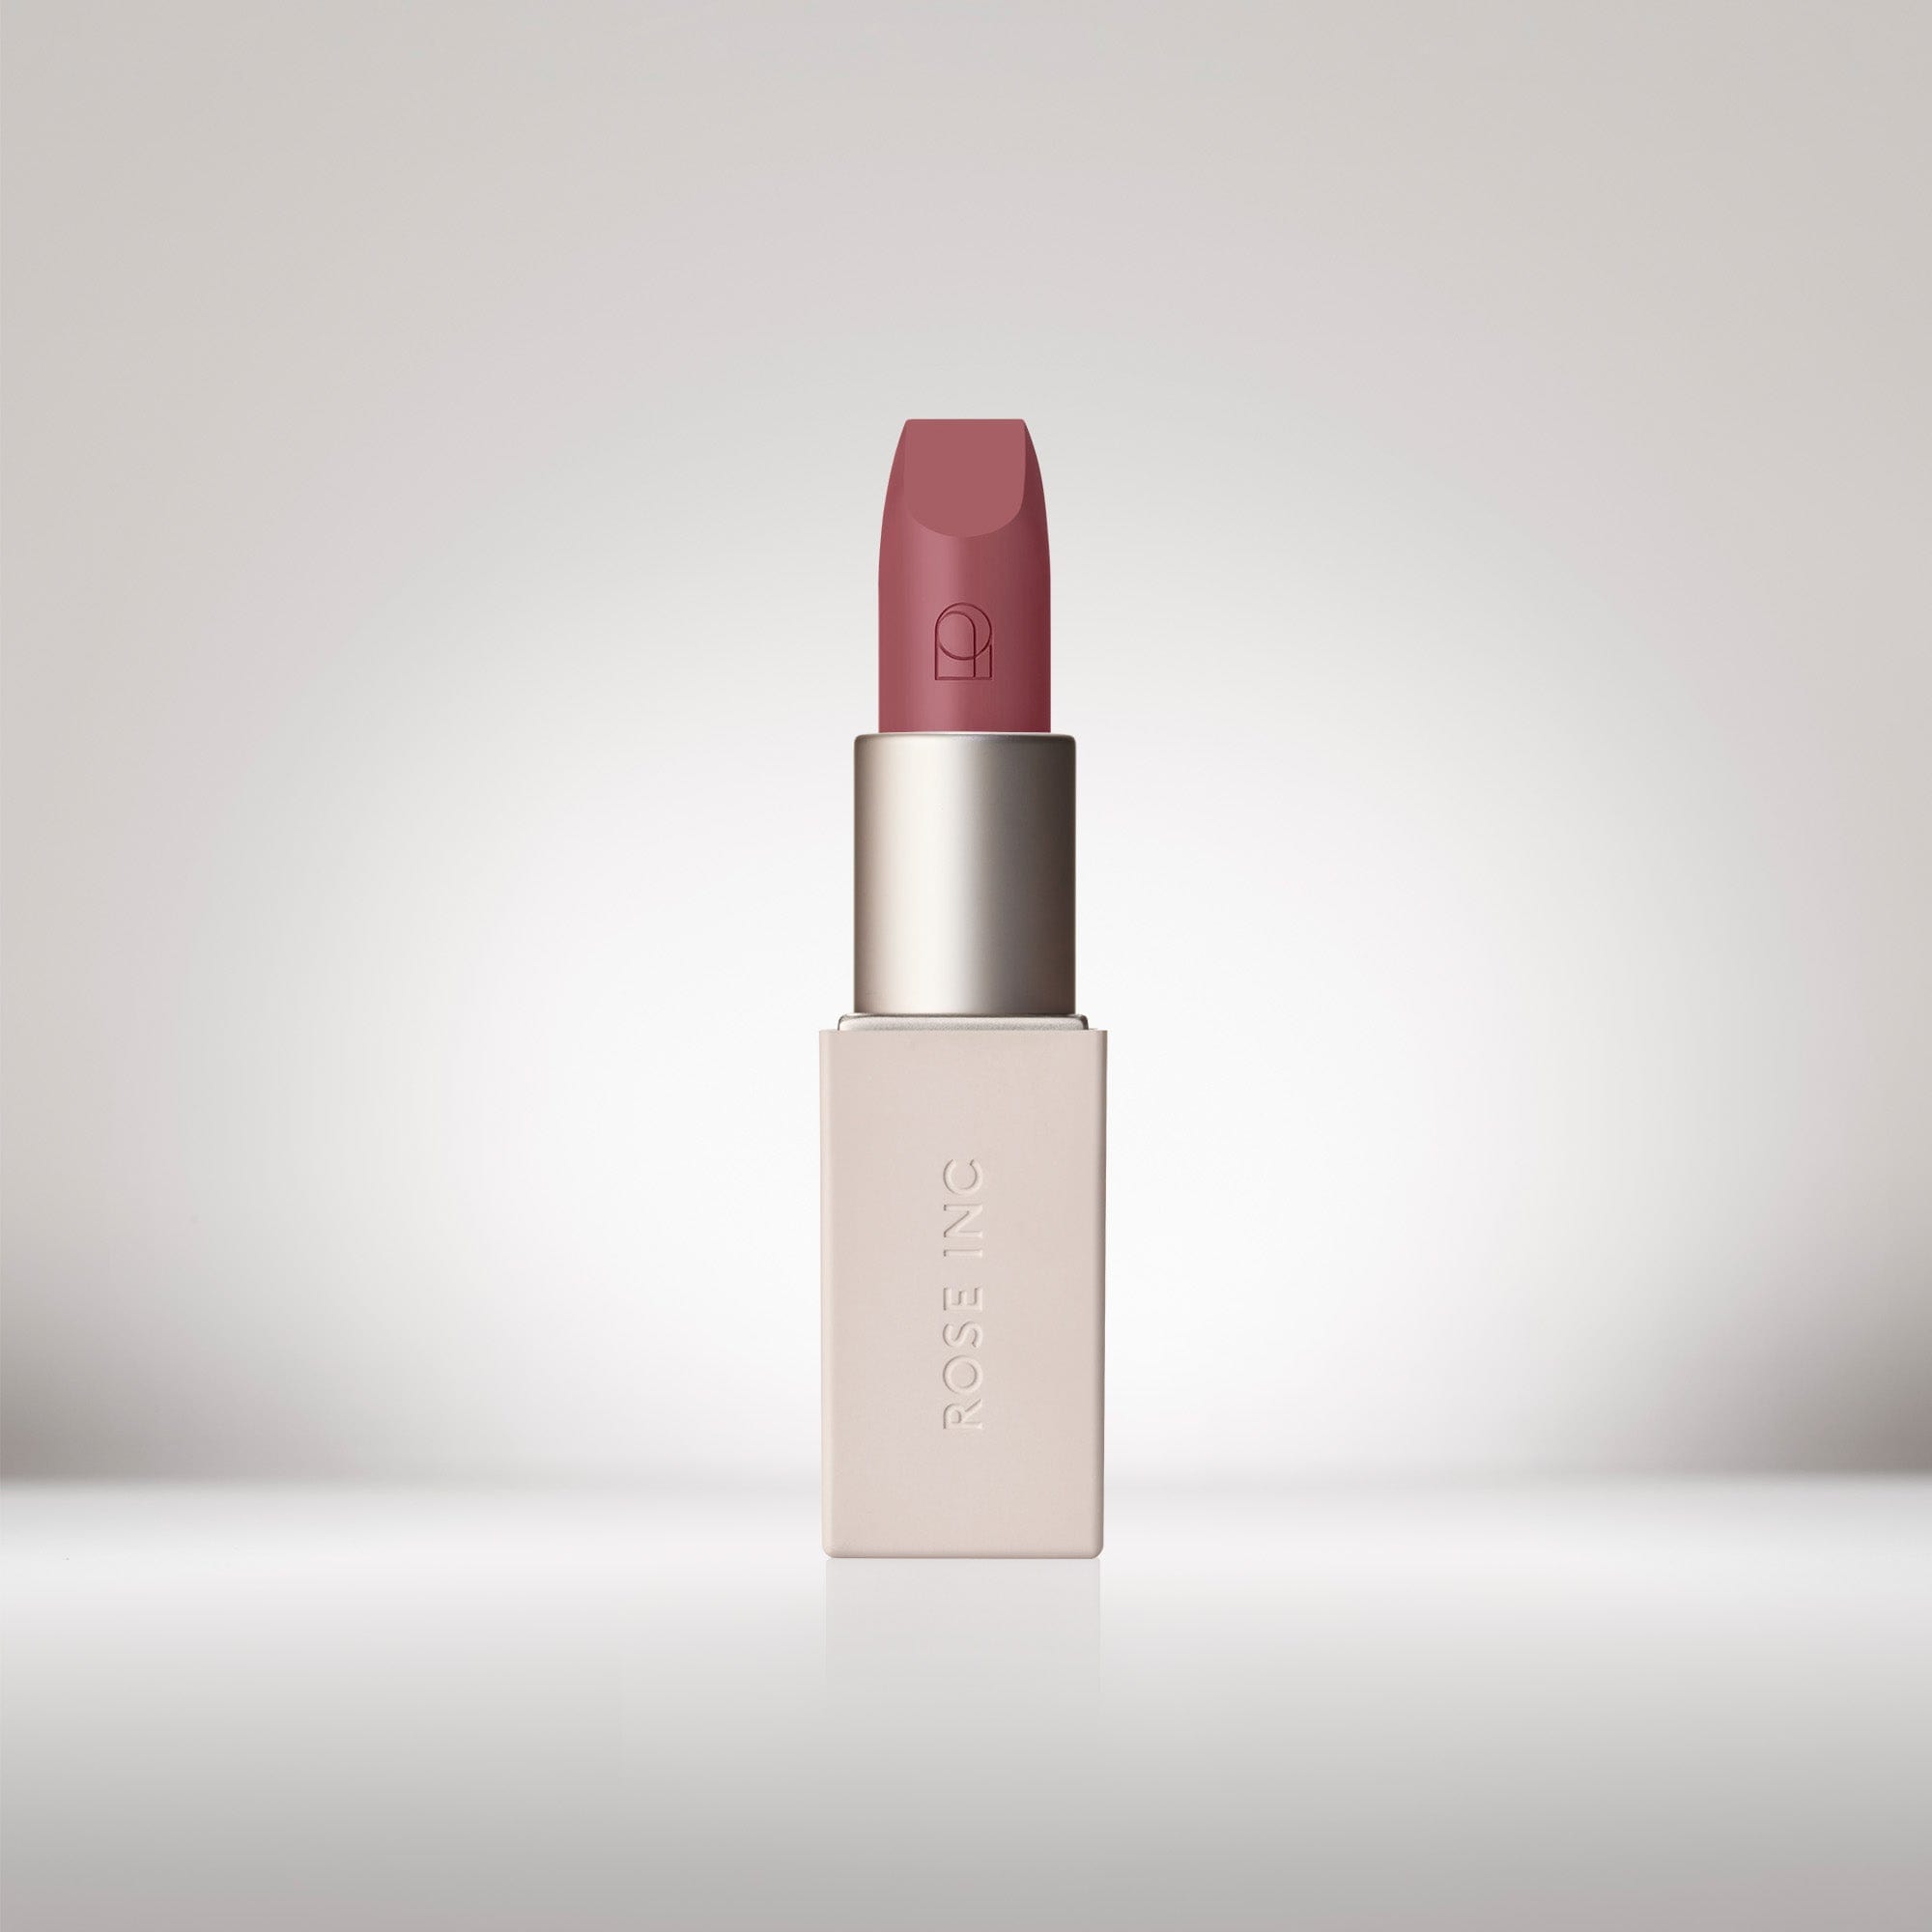 Image of an opened Satin Lip Color Rich Refillable Lipstick in shade Intuitive